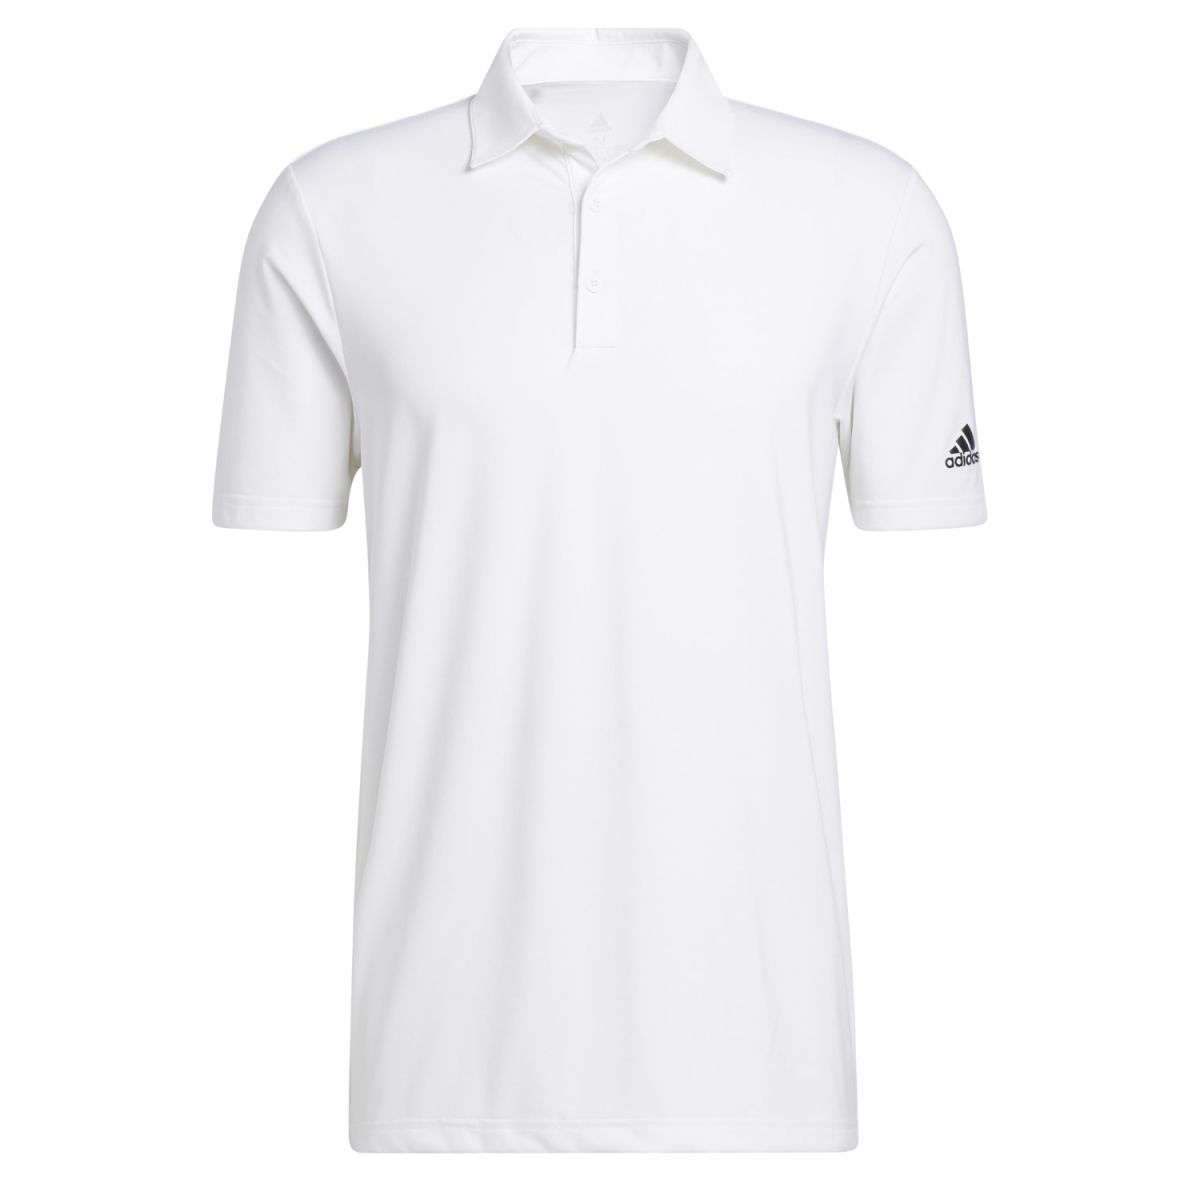 adidas polo ultimate 365 solid white s